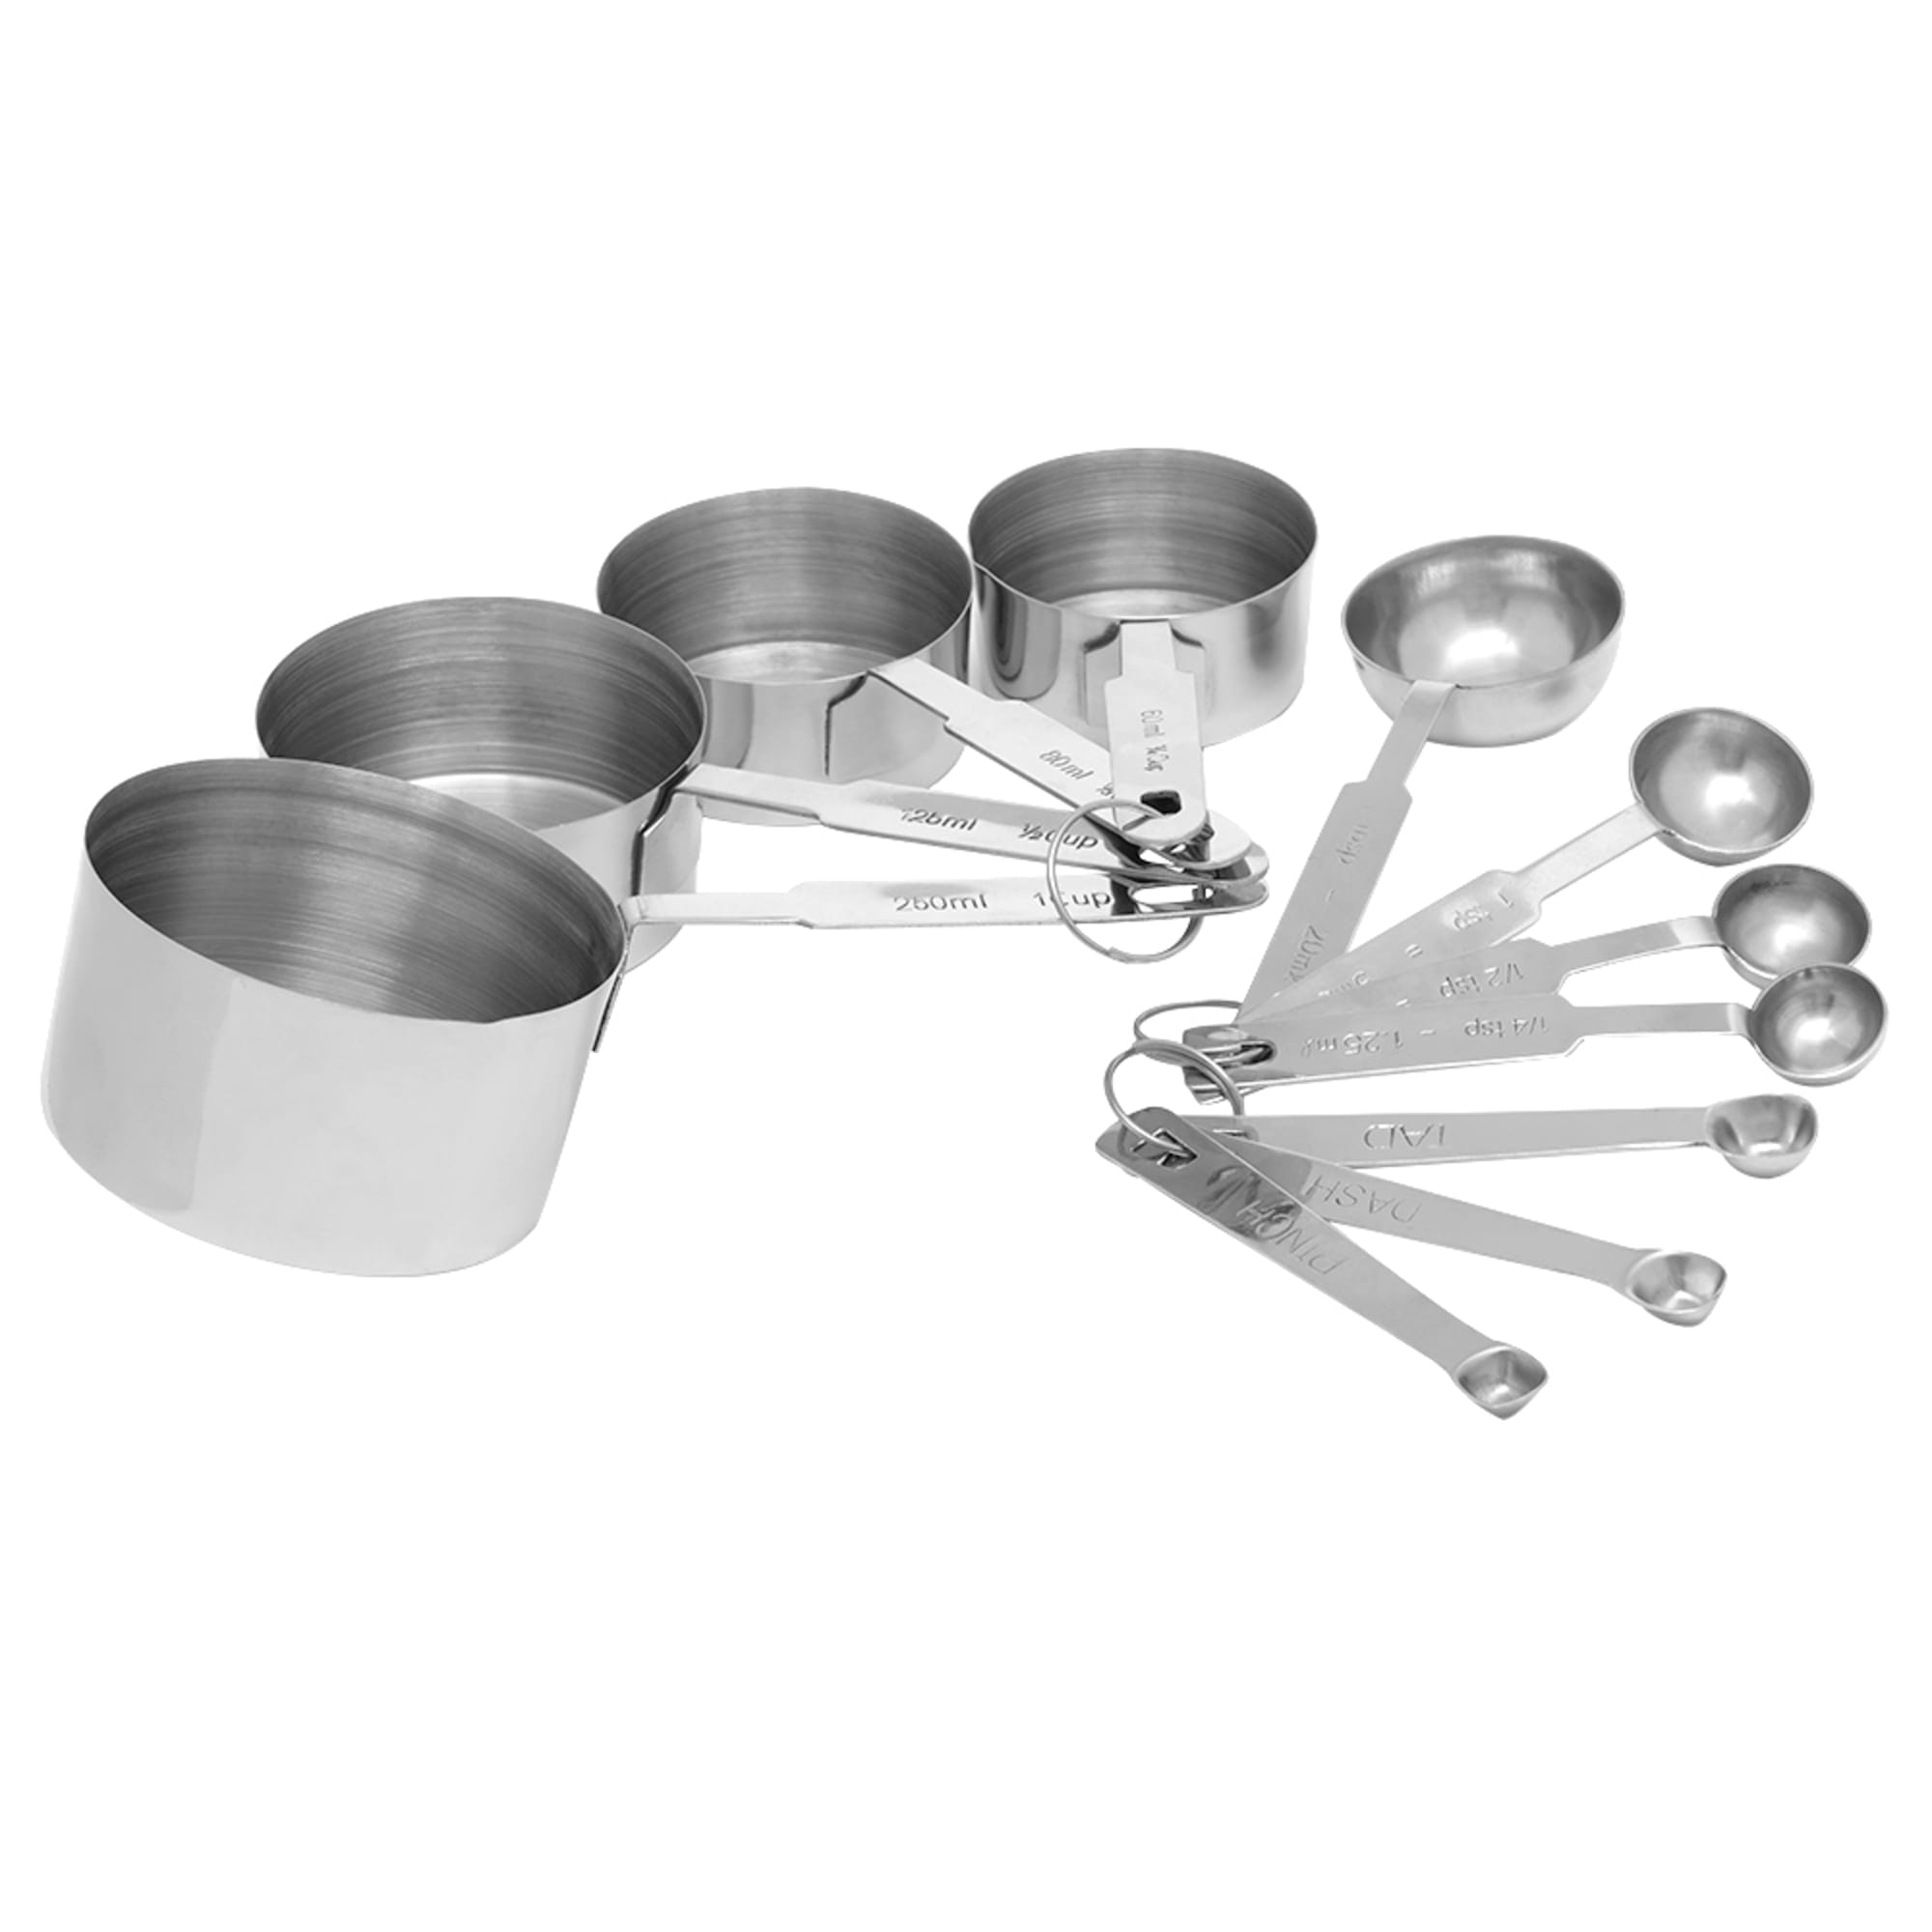 Chicago Metallic Stainless Steel Measuring Cups and Spoons, 11